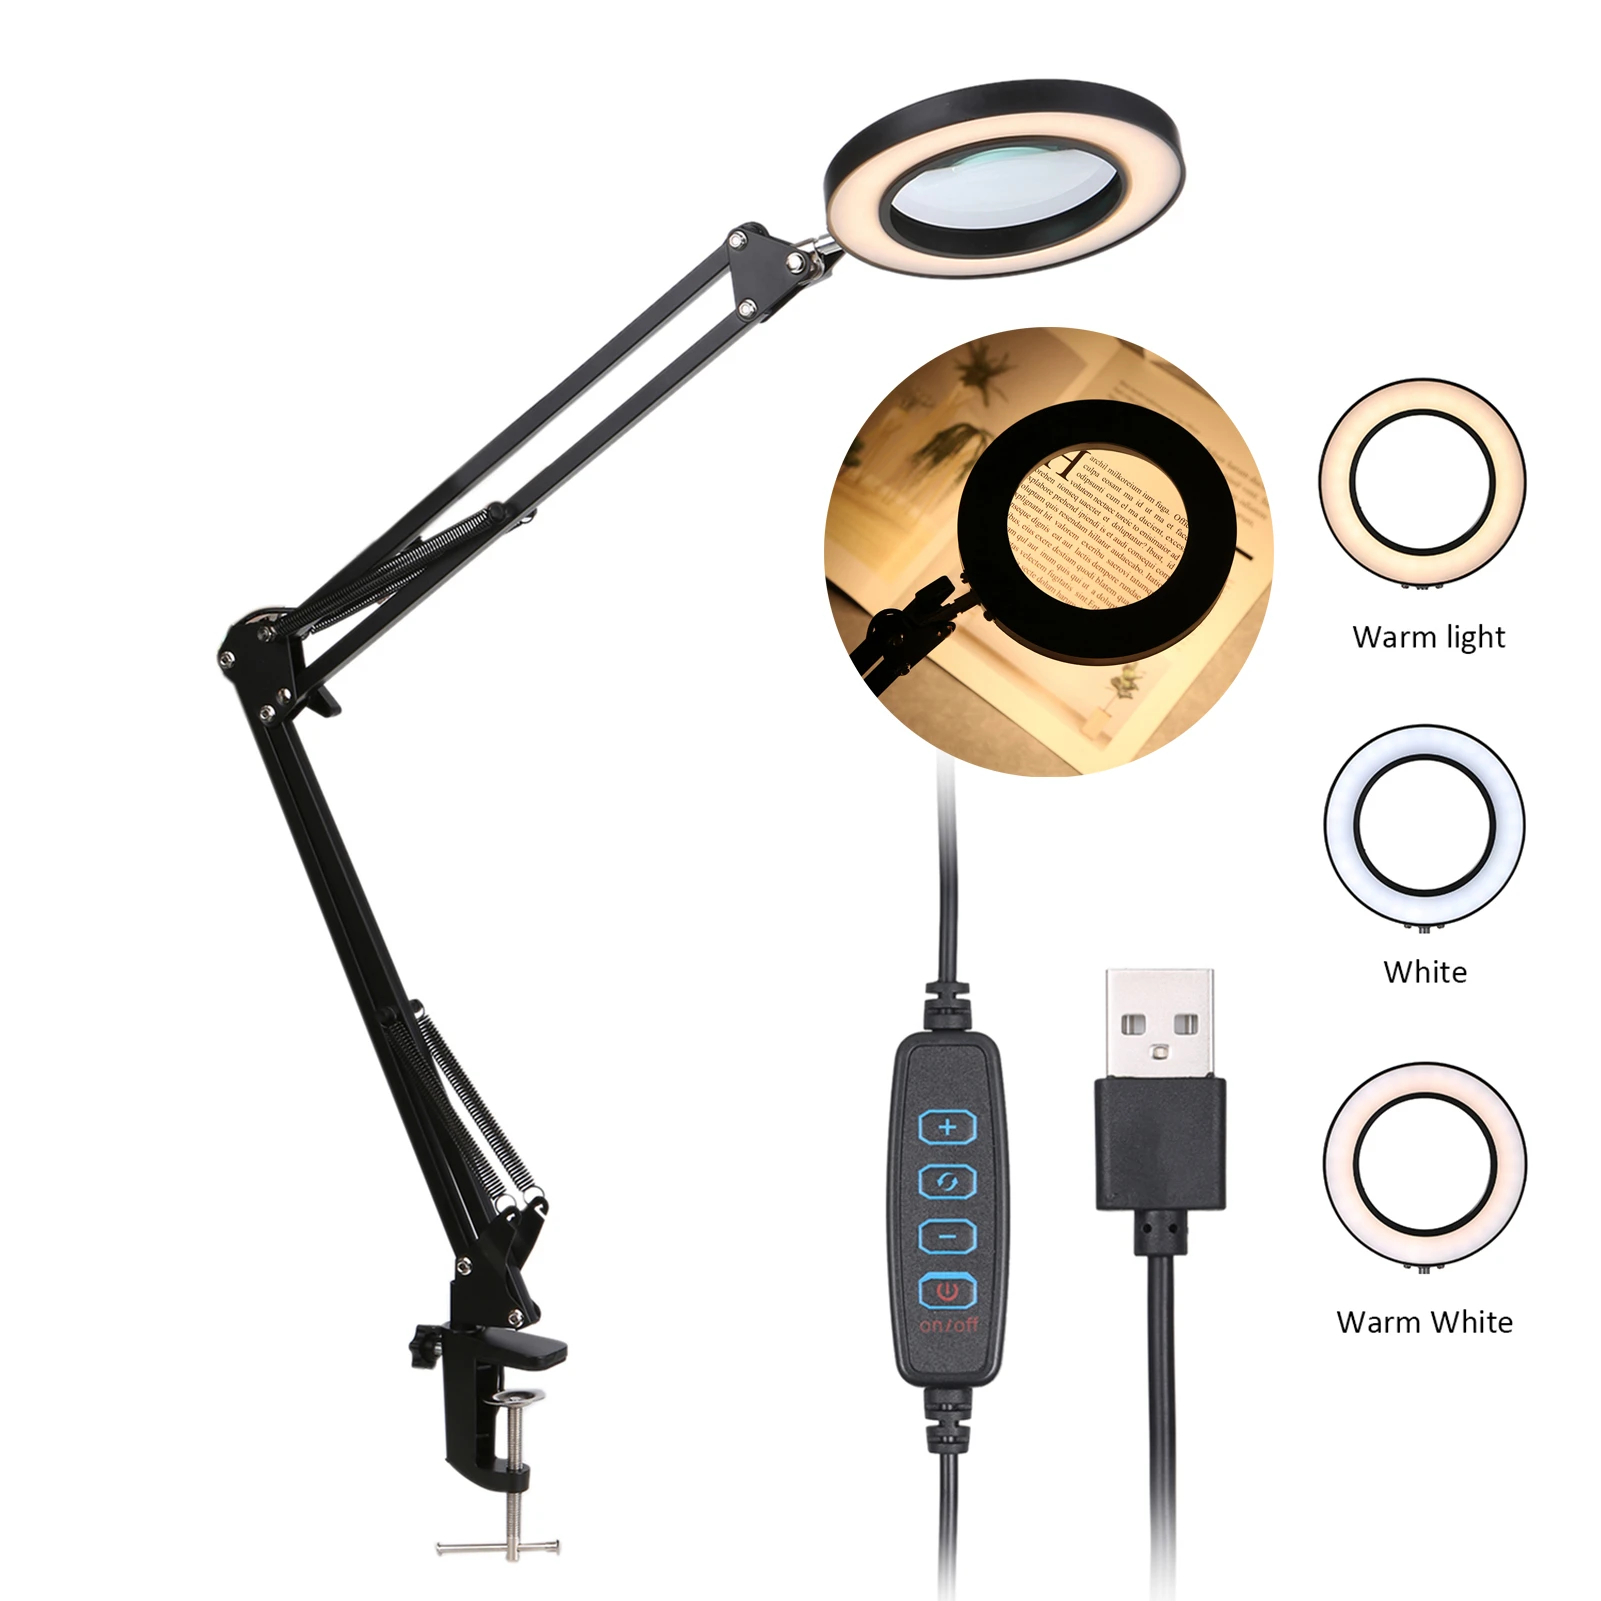 Foldable Professional 5X Magnifying Glass Desk Lamp Magnifier LED Light Reading Lamp with Three Dimming Modes USB Power Supply